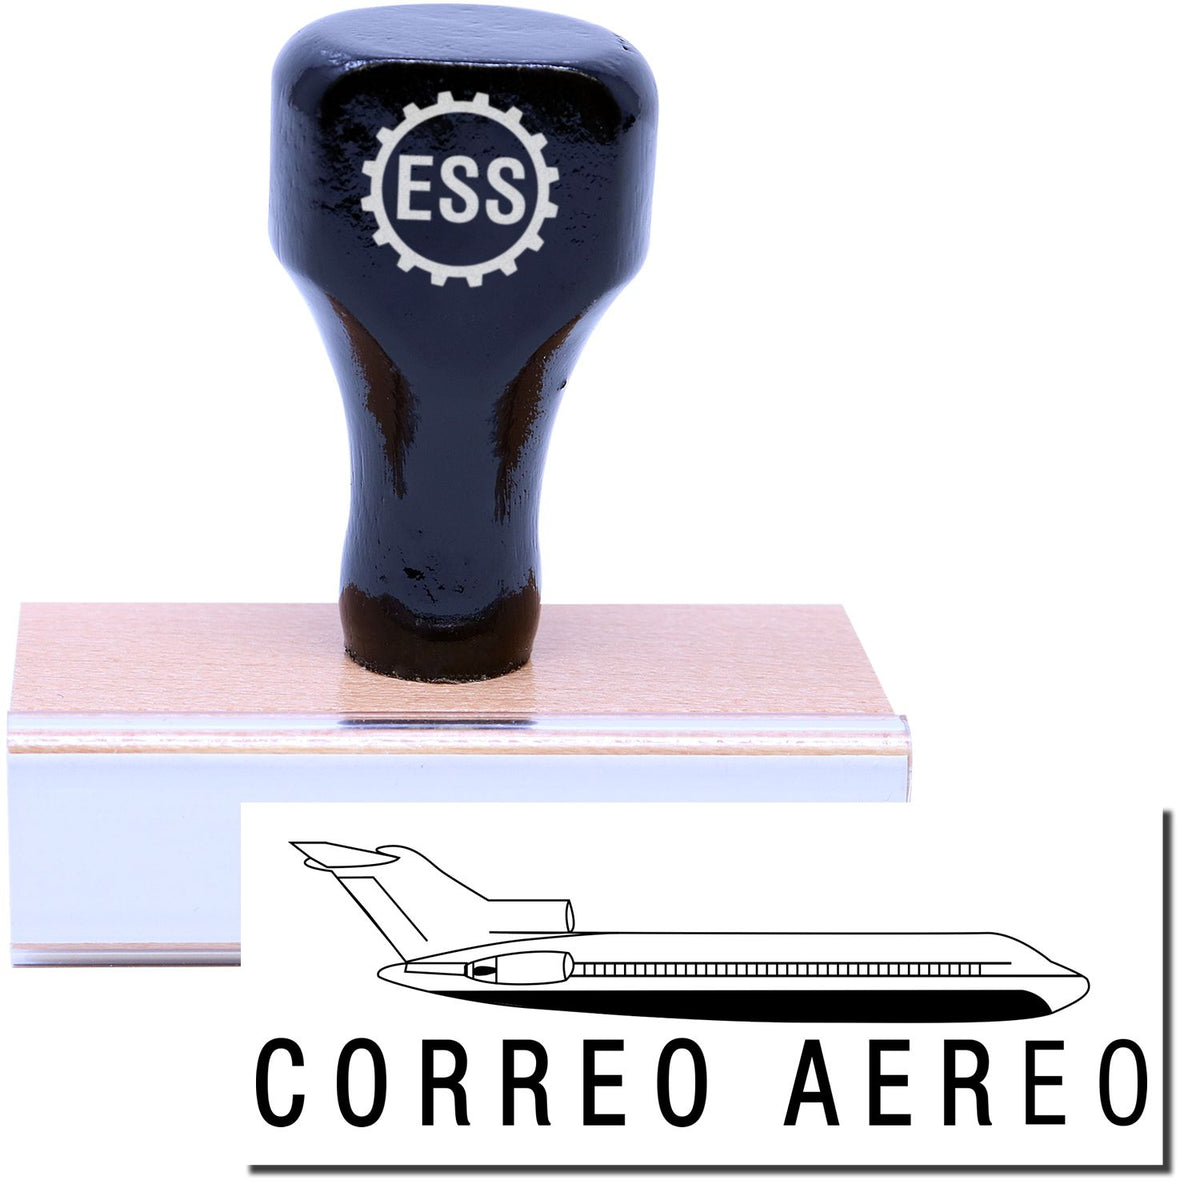 A stock office rubber stamp with a stamped image showing how the text &quot;CORREO AERO&quot; in a large font with an airplane icon above the text is displayed after stamping.